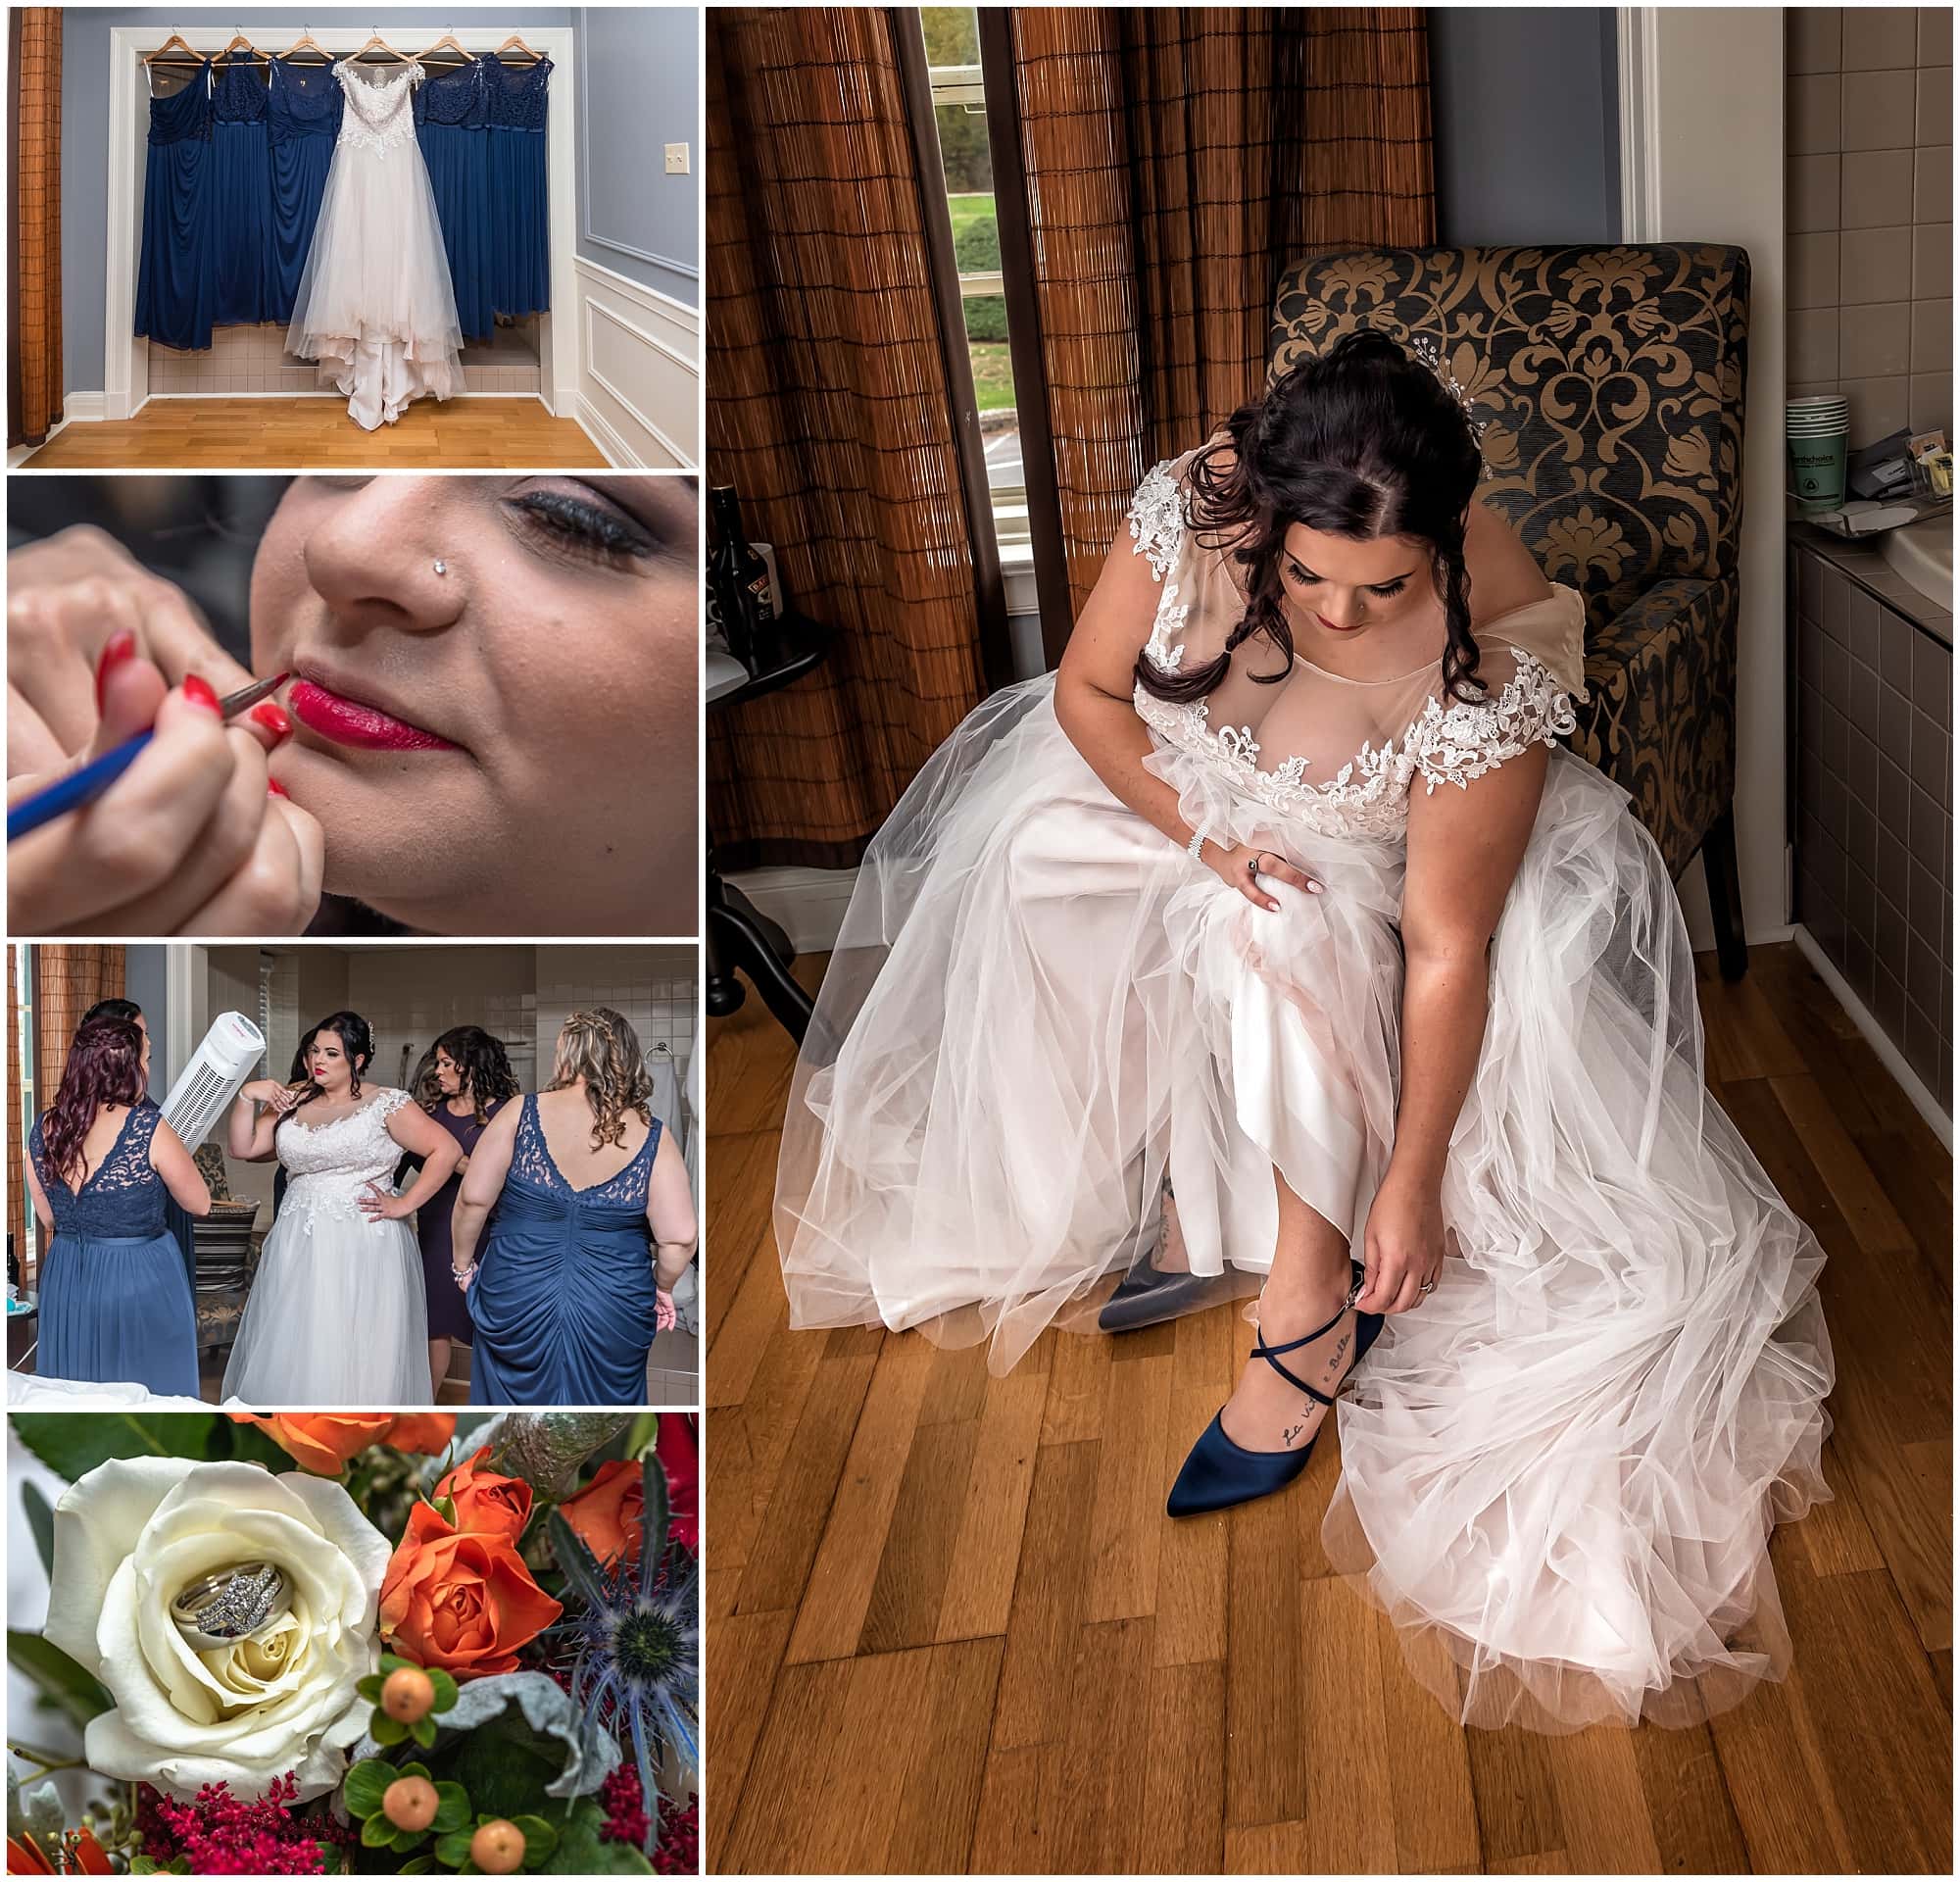 The bridal prep prior to the wedding ceremony of the bride getting ready at Digby Pines Resort in Nova Scotia.